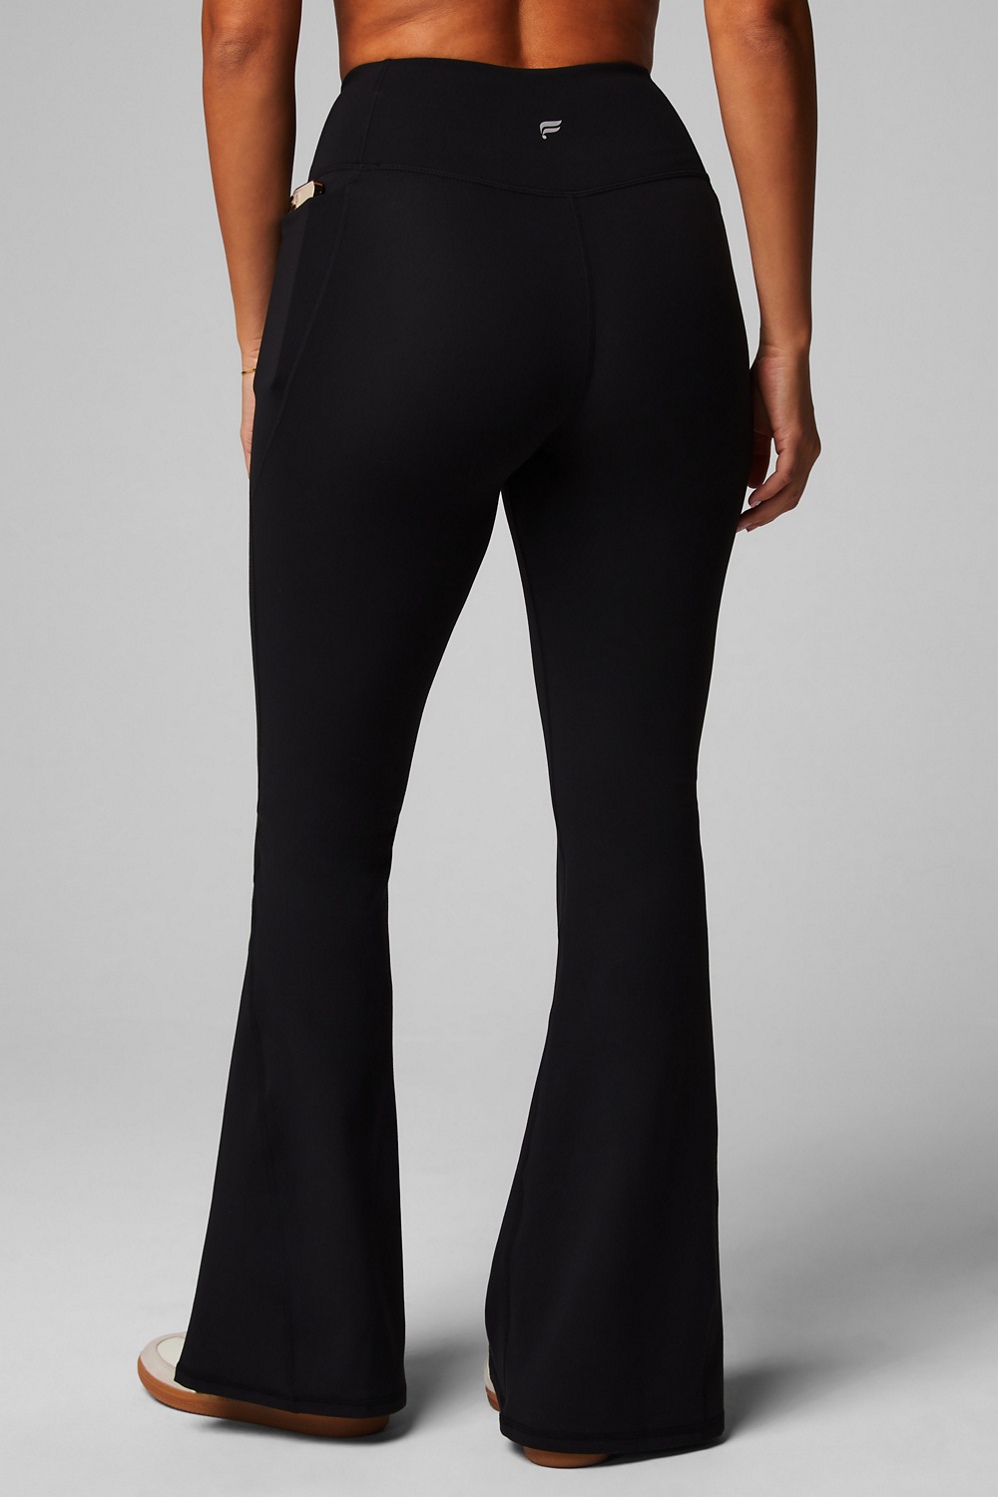 CTHH Women's Flare Yoga Pants-Crossover Flare India